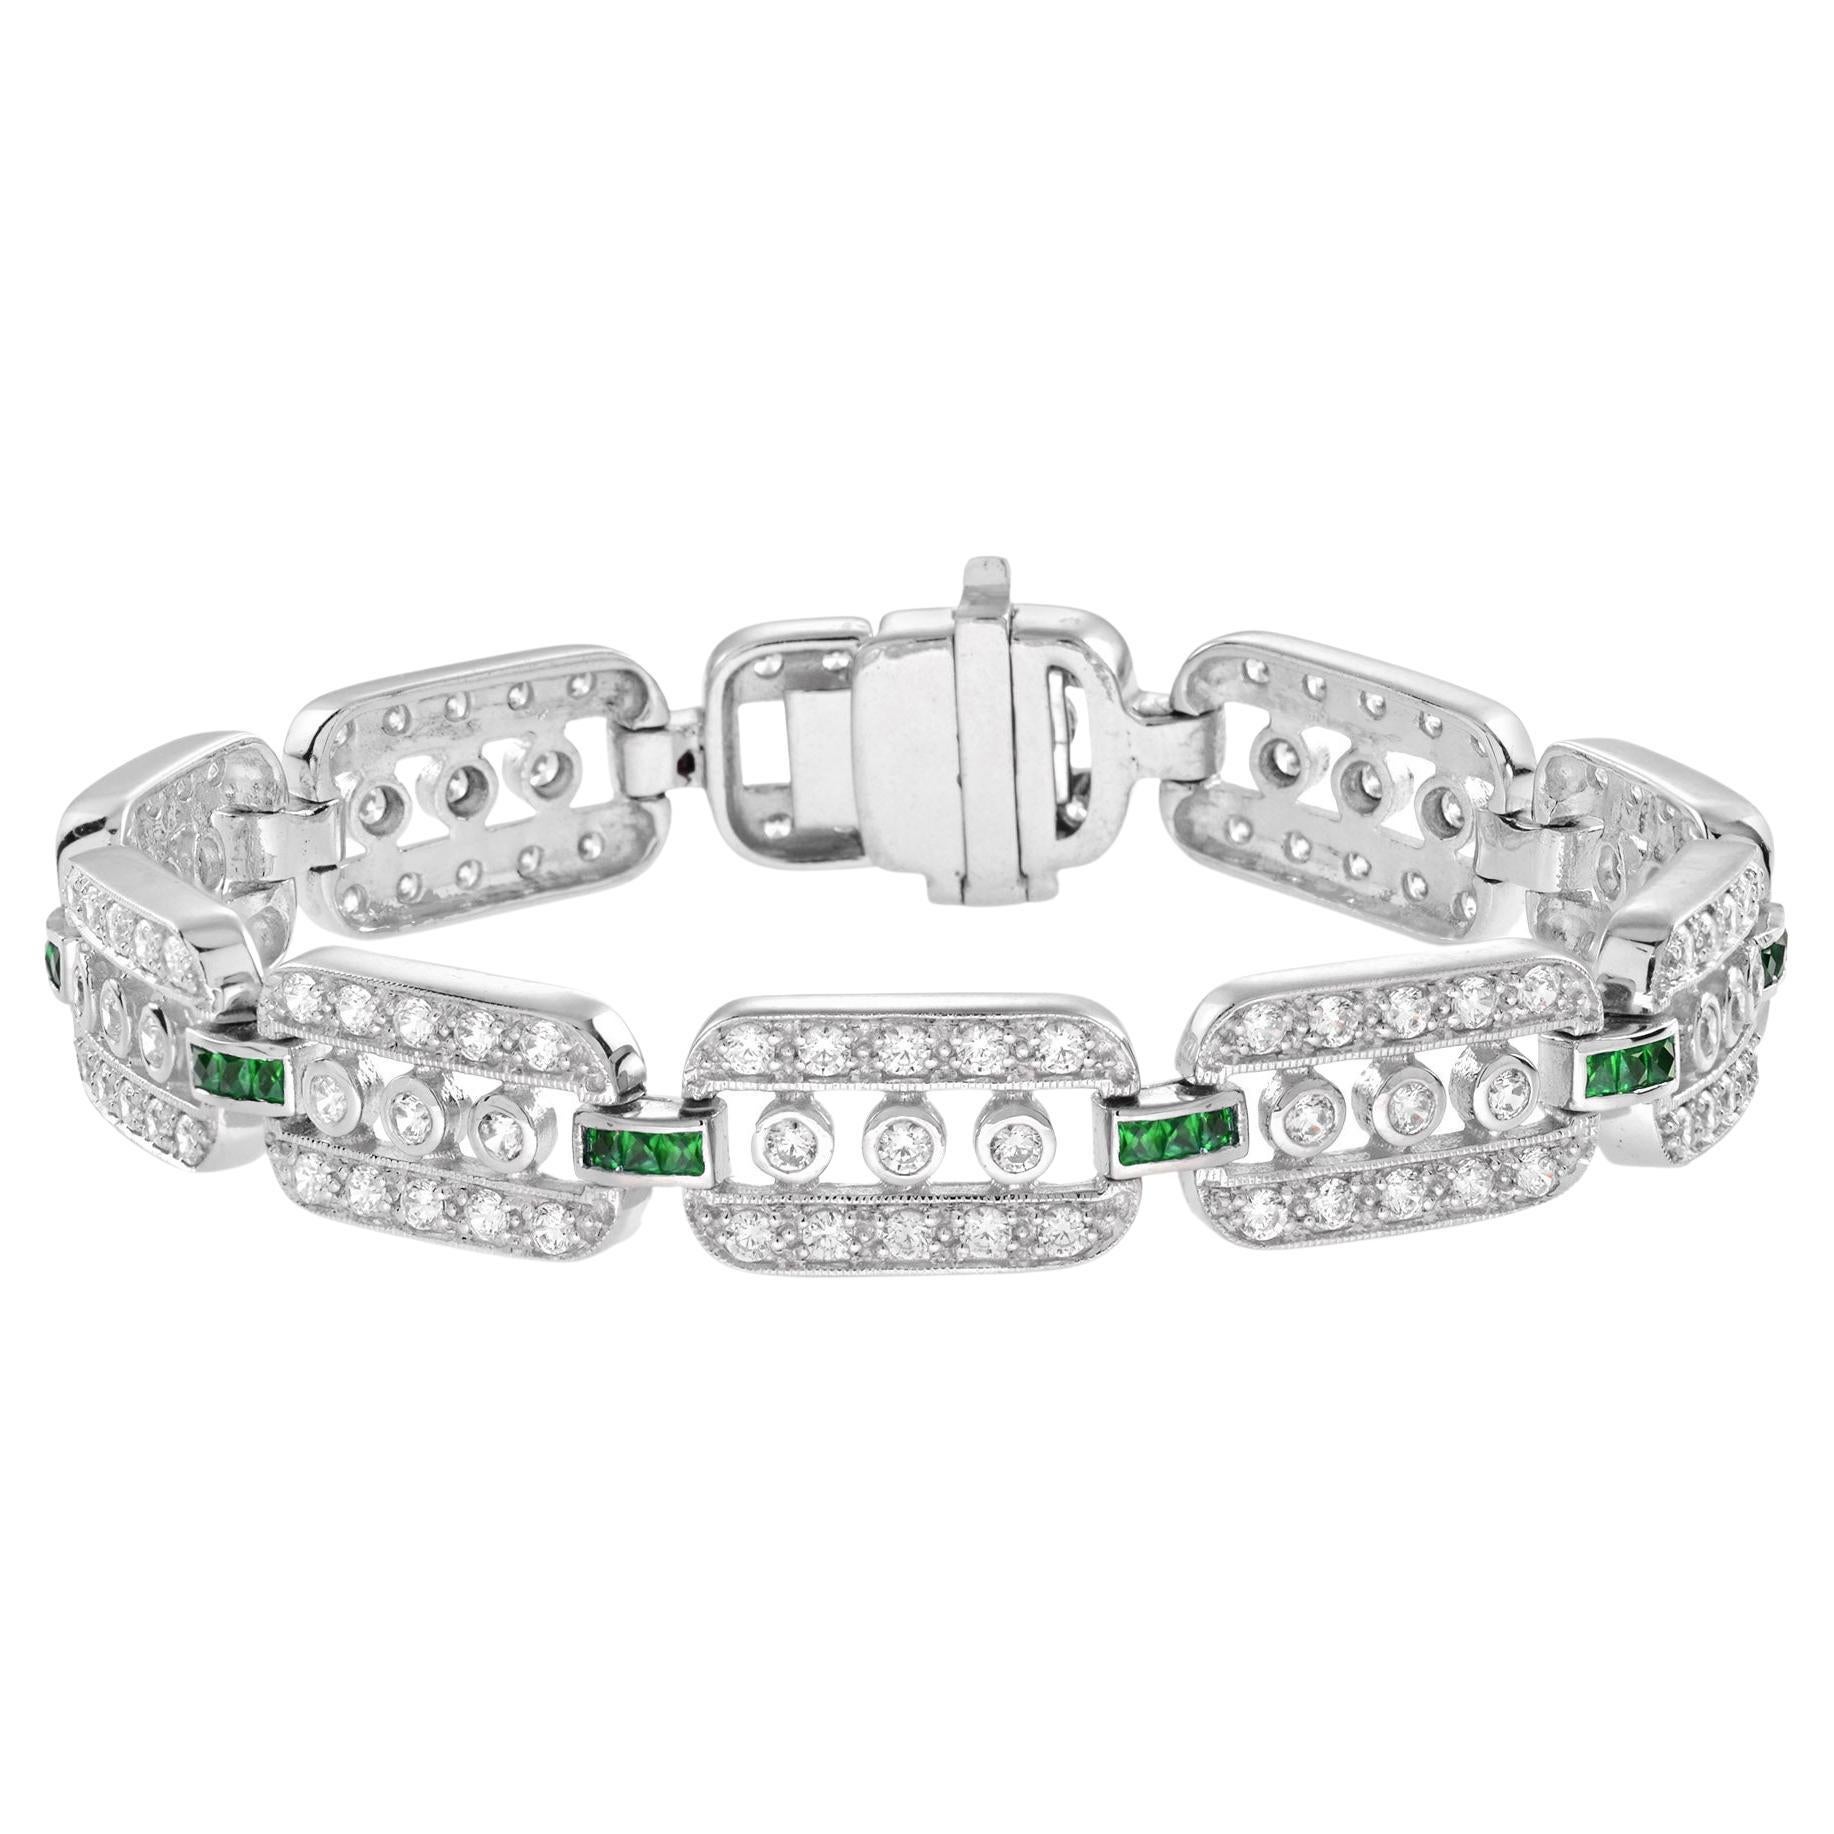 6 Ct. Diamond and Emerald Art Deco Style Link Bracelet in 14K White Gold For Sale